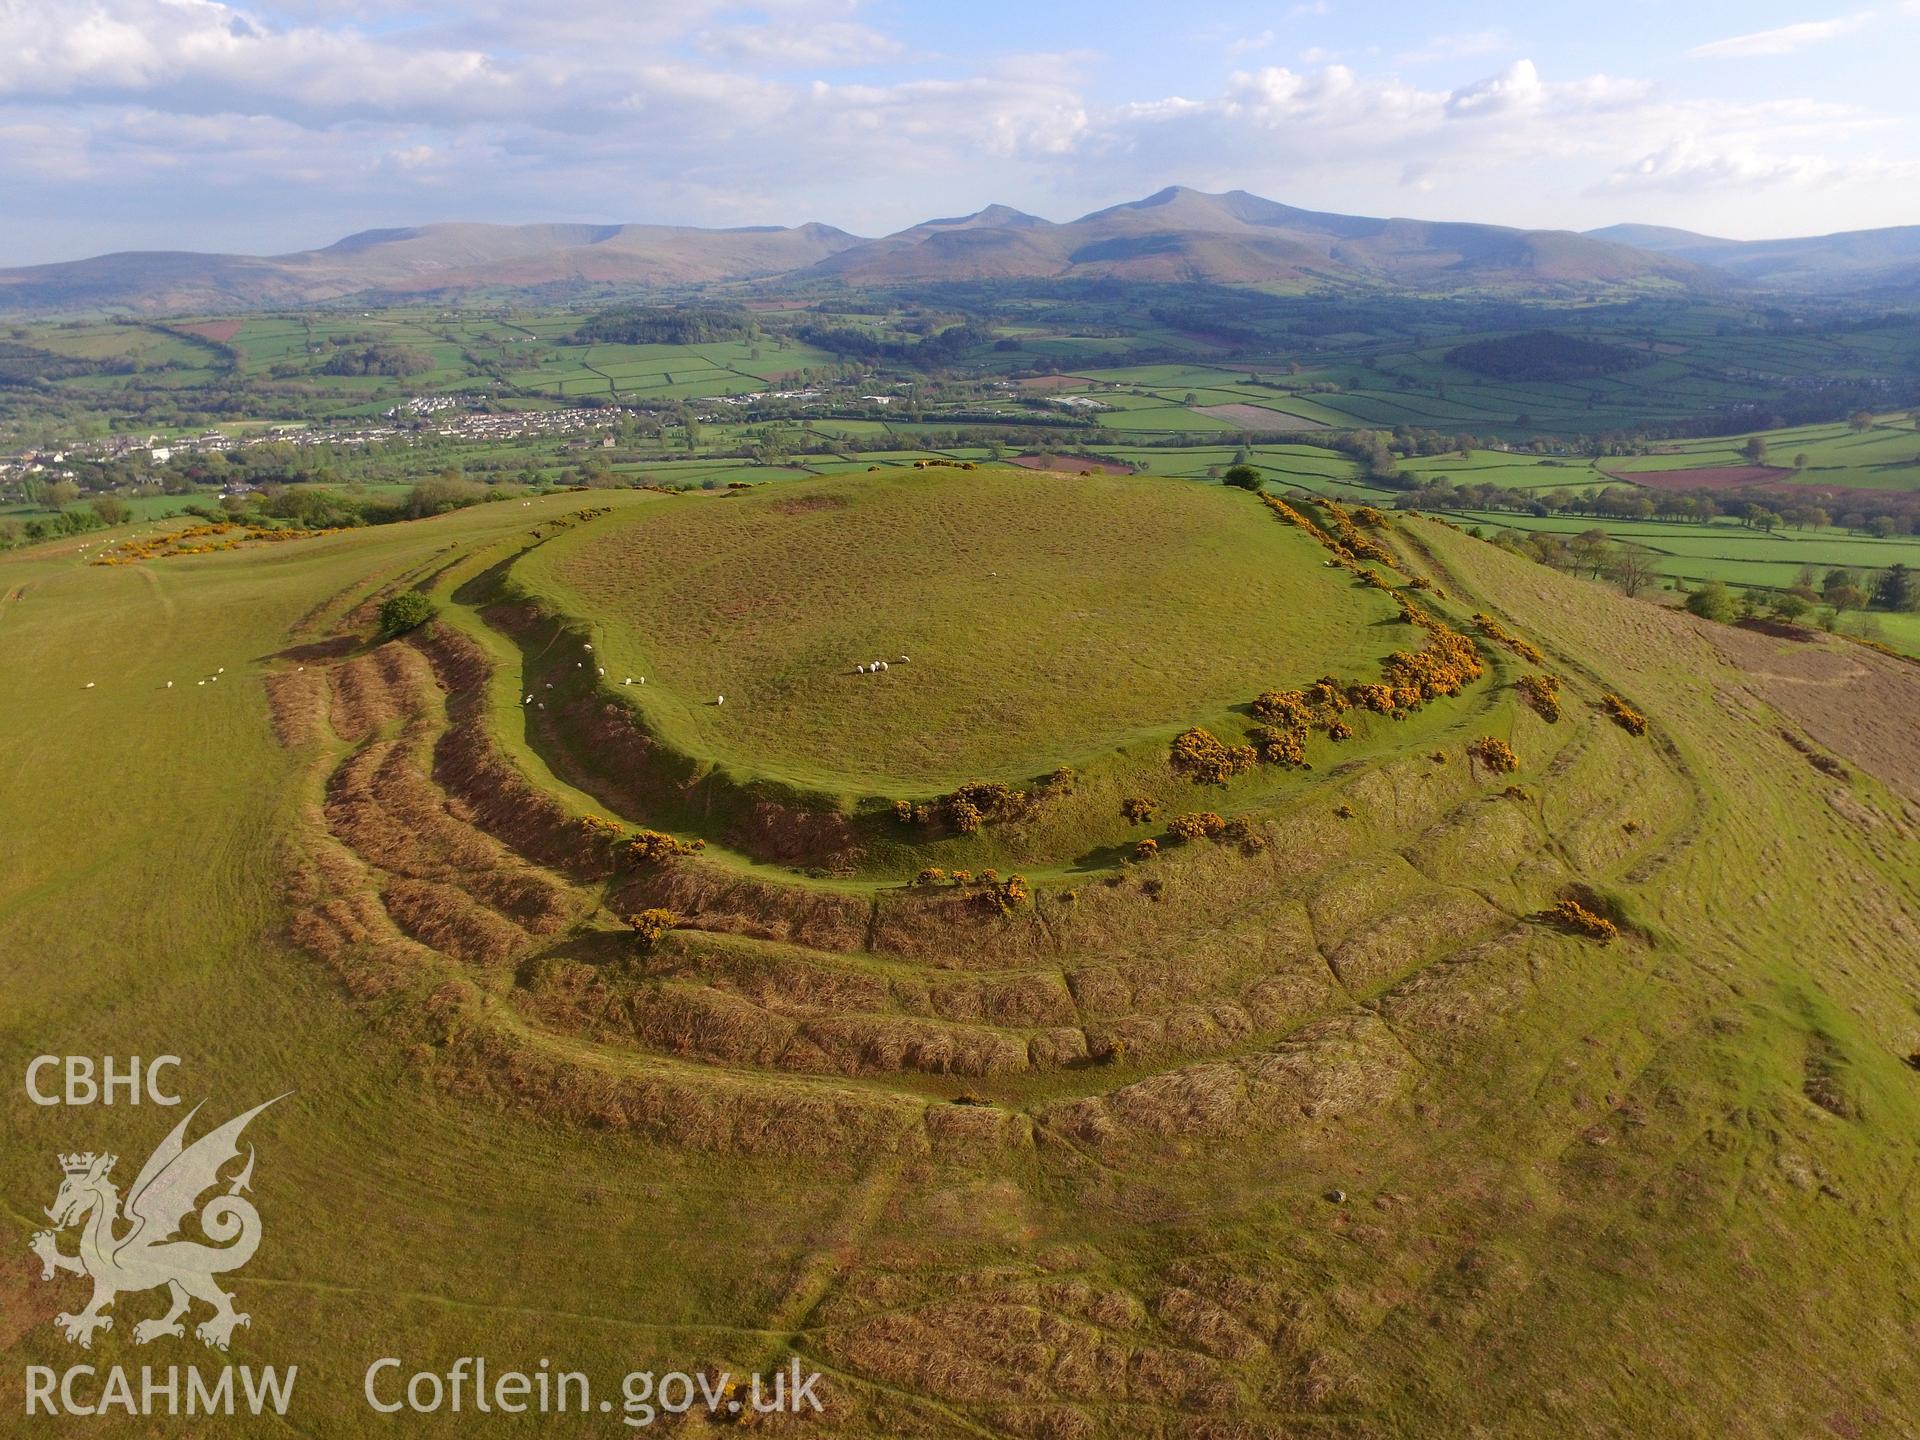 Colour photo showing Pen y Crug Hillfort, produced by Paul R. Davis,  7th May 2017.